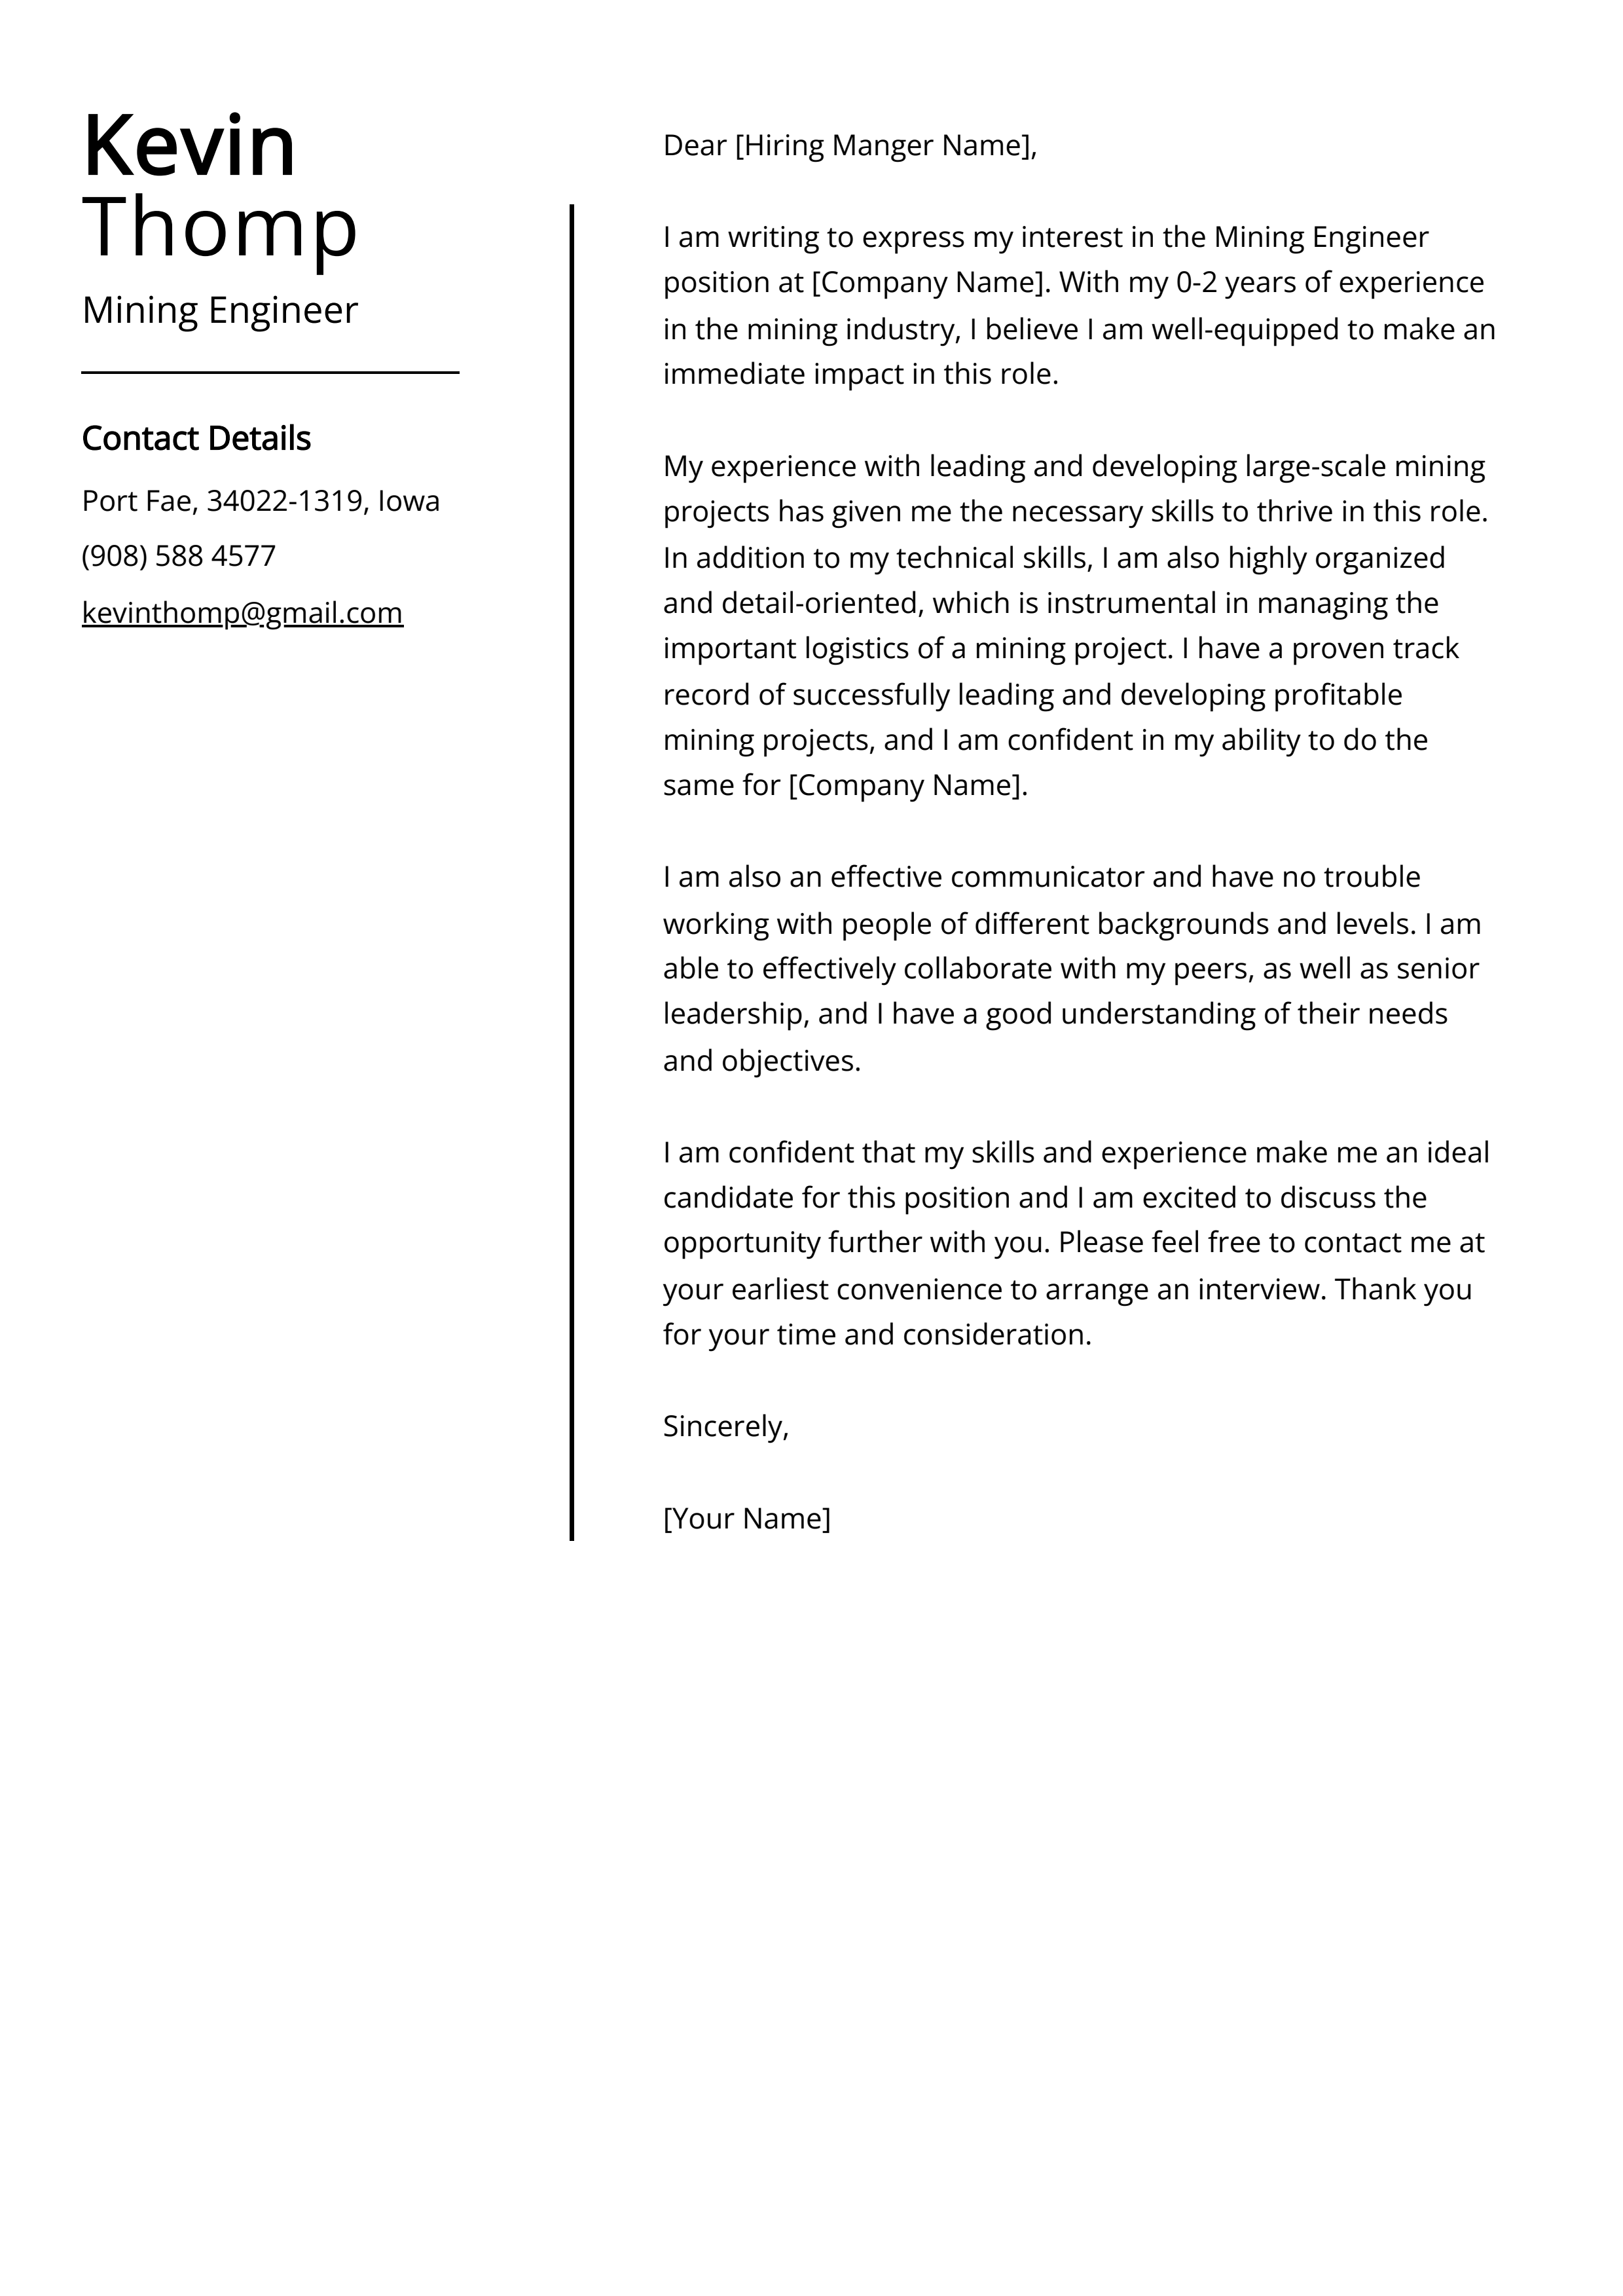 Mining Engineer Cover Letter Example